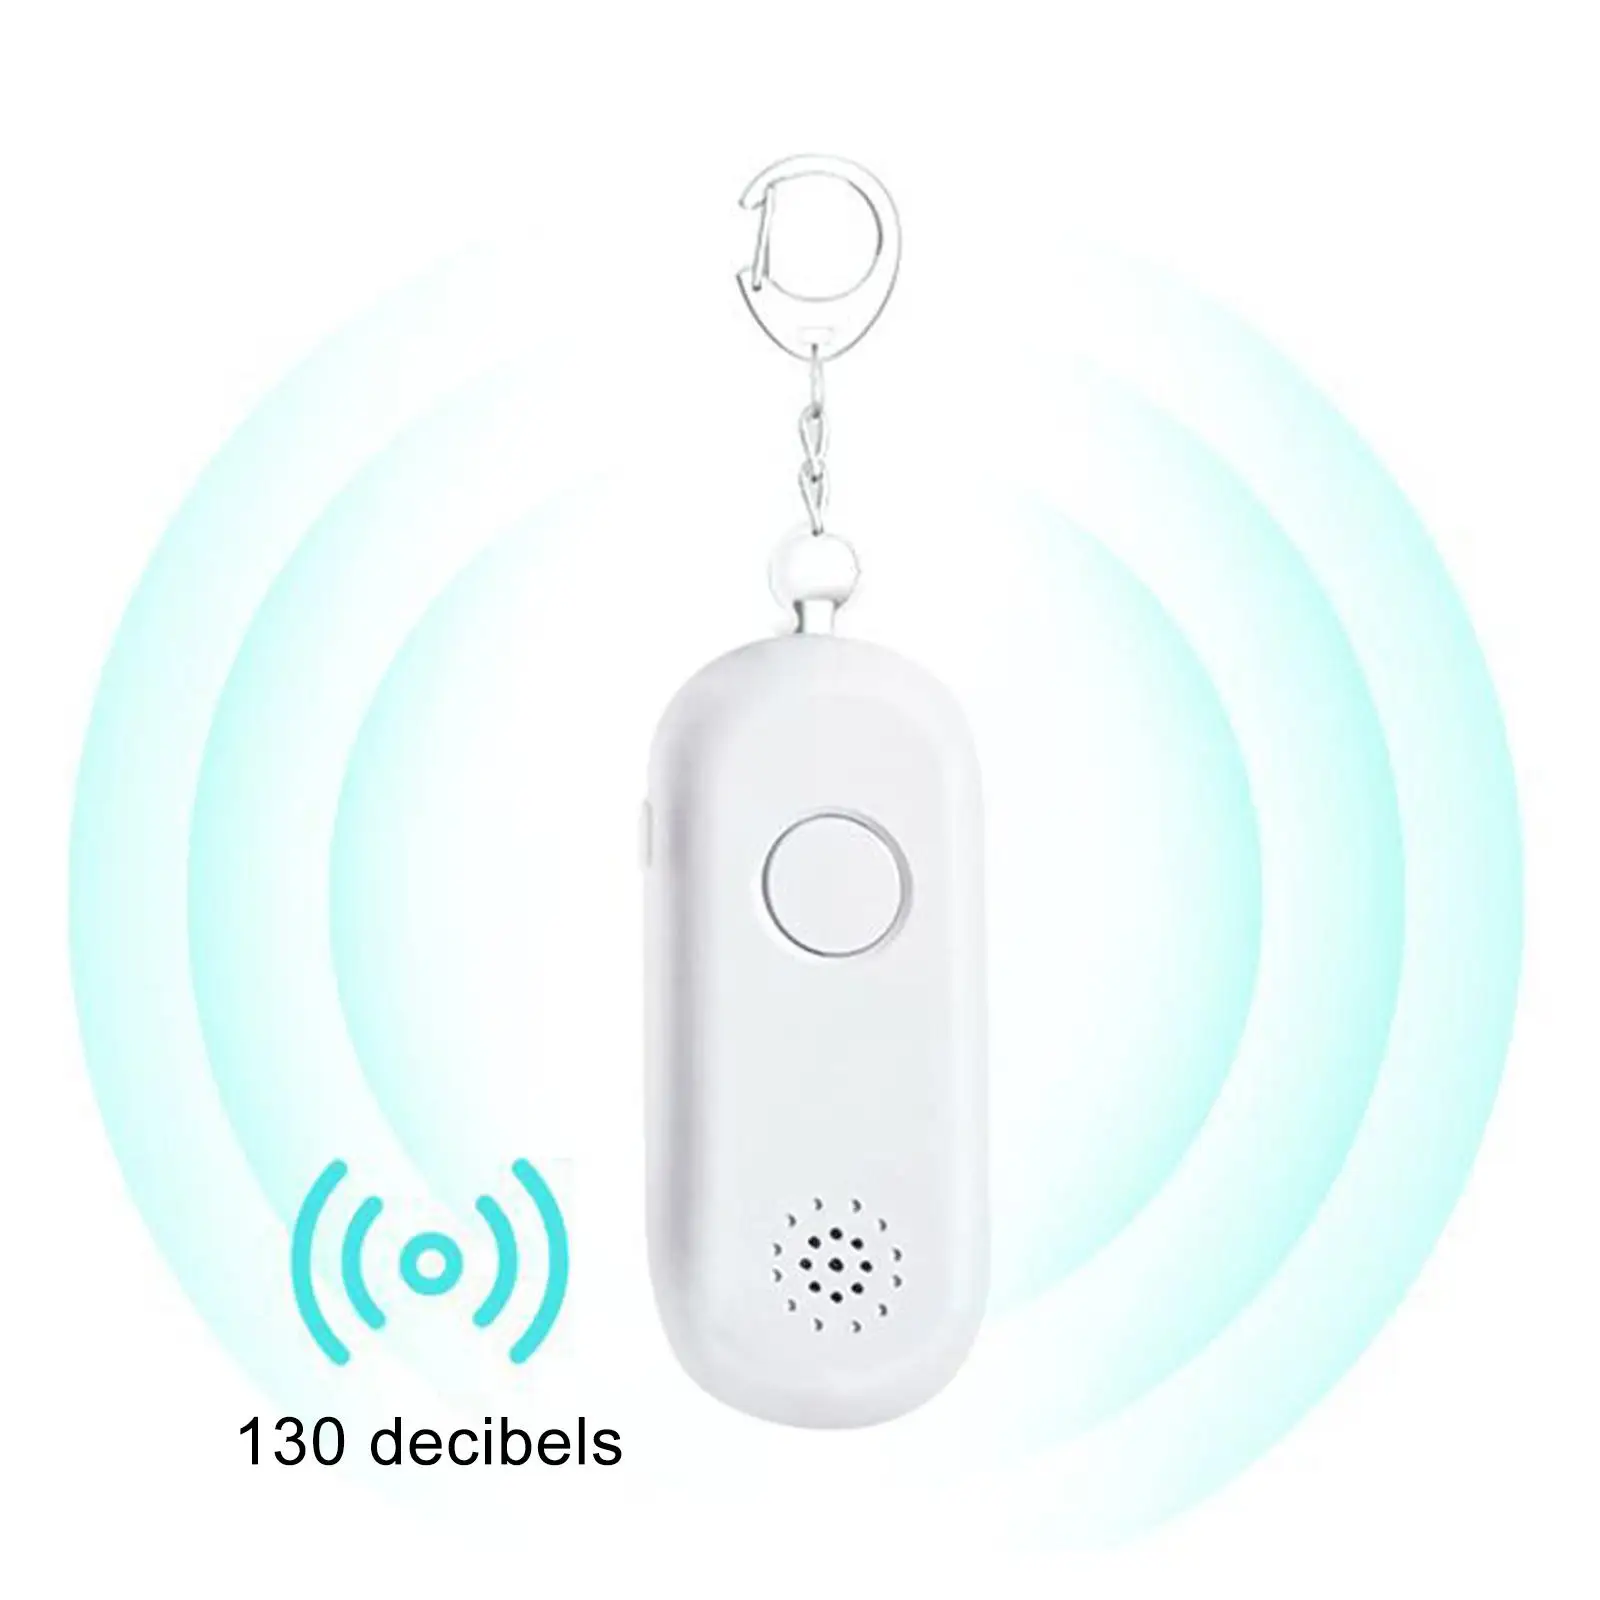 Security Alarm Protection Device 130dB Pocket Alarm Keychain for Camping Security Protect Kids Women Boys